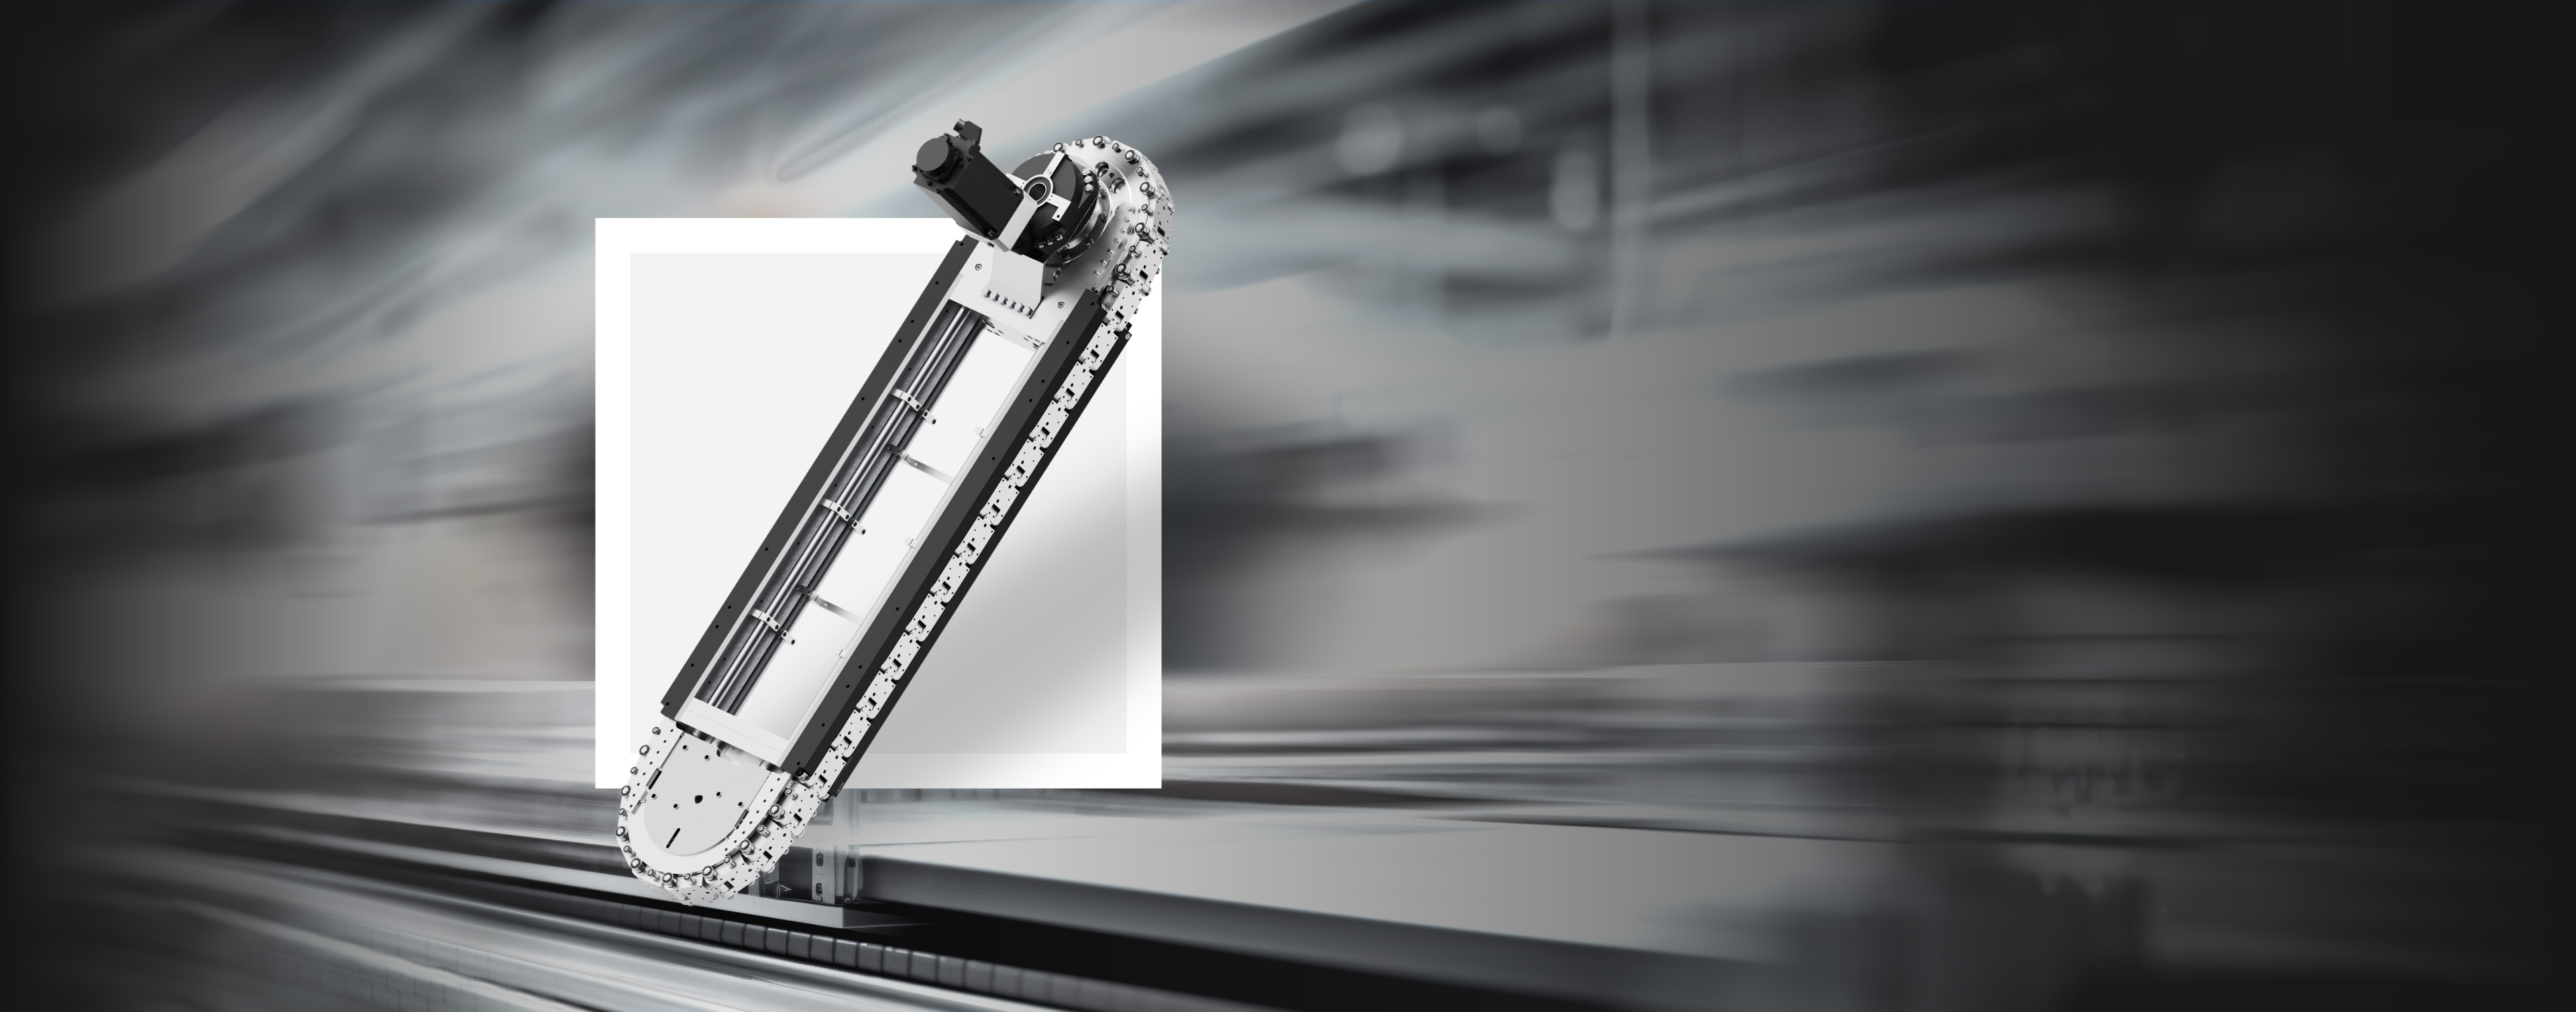 LS Link Conveyor System – advanced in large-scale series production.